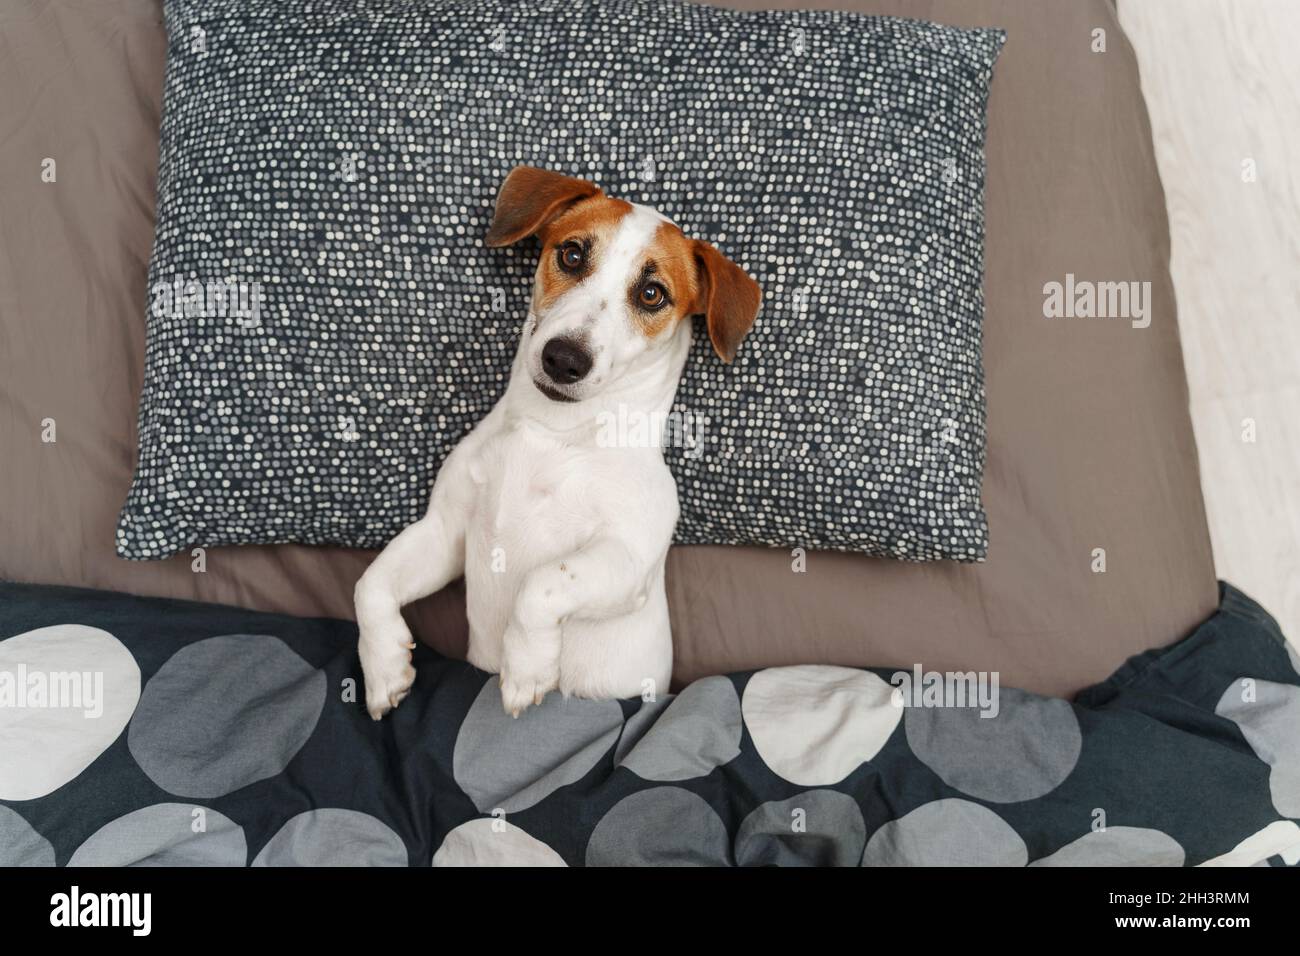 Jack russell terrier dog sleeping on a bed in a bedroom. Stock Photo